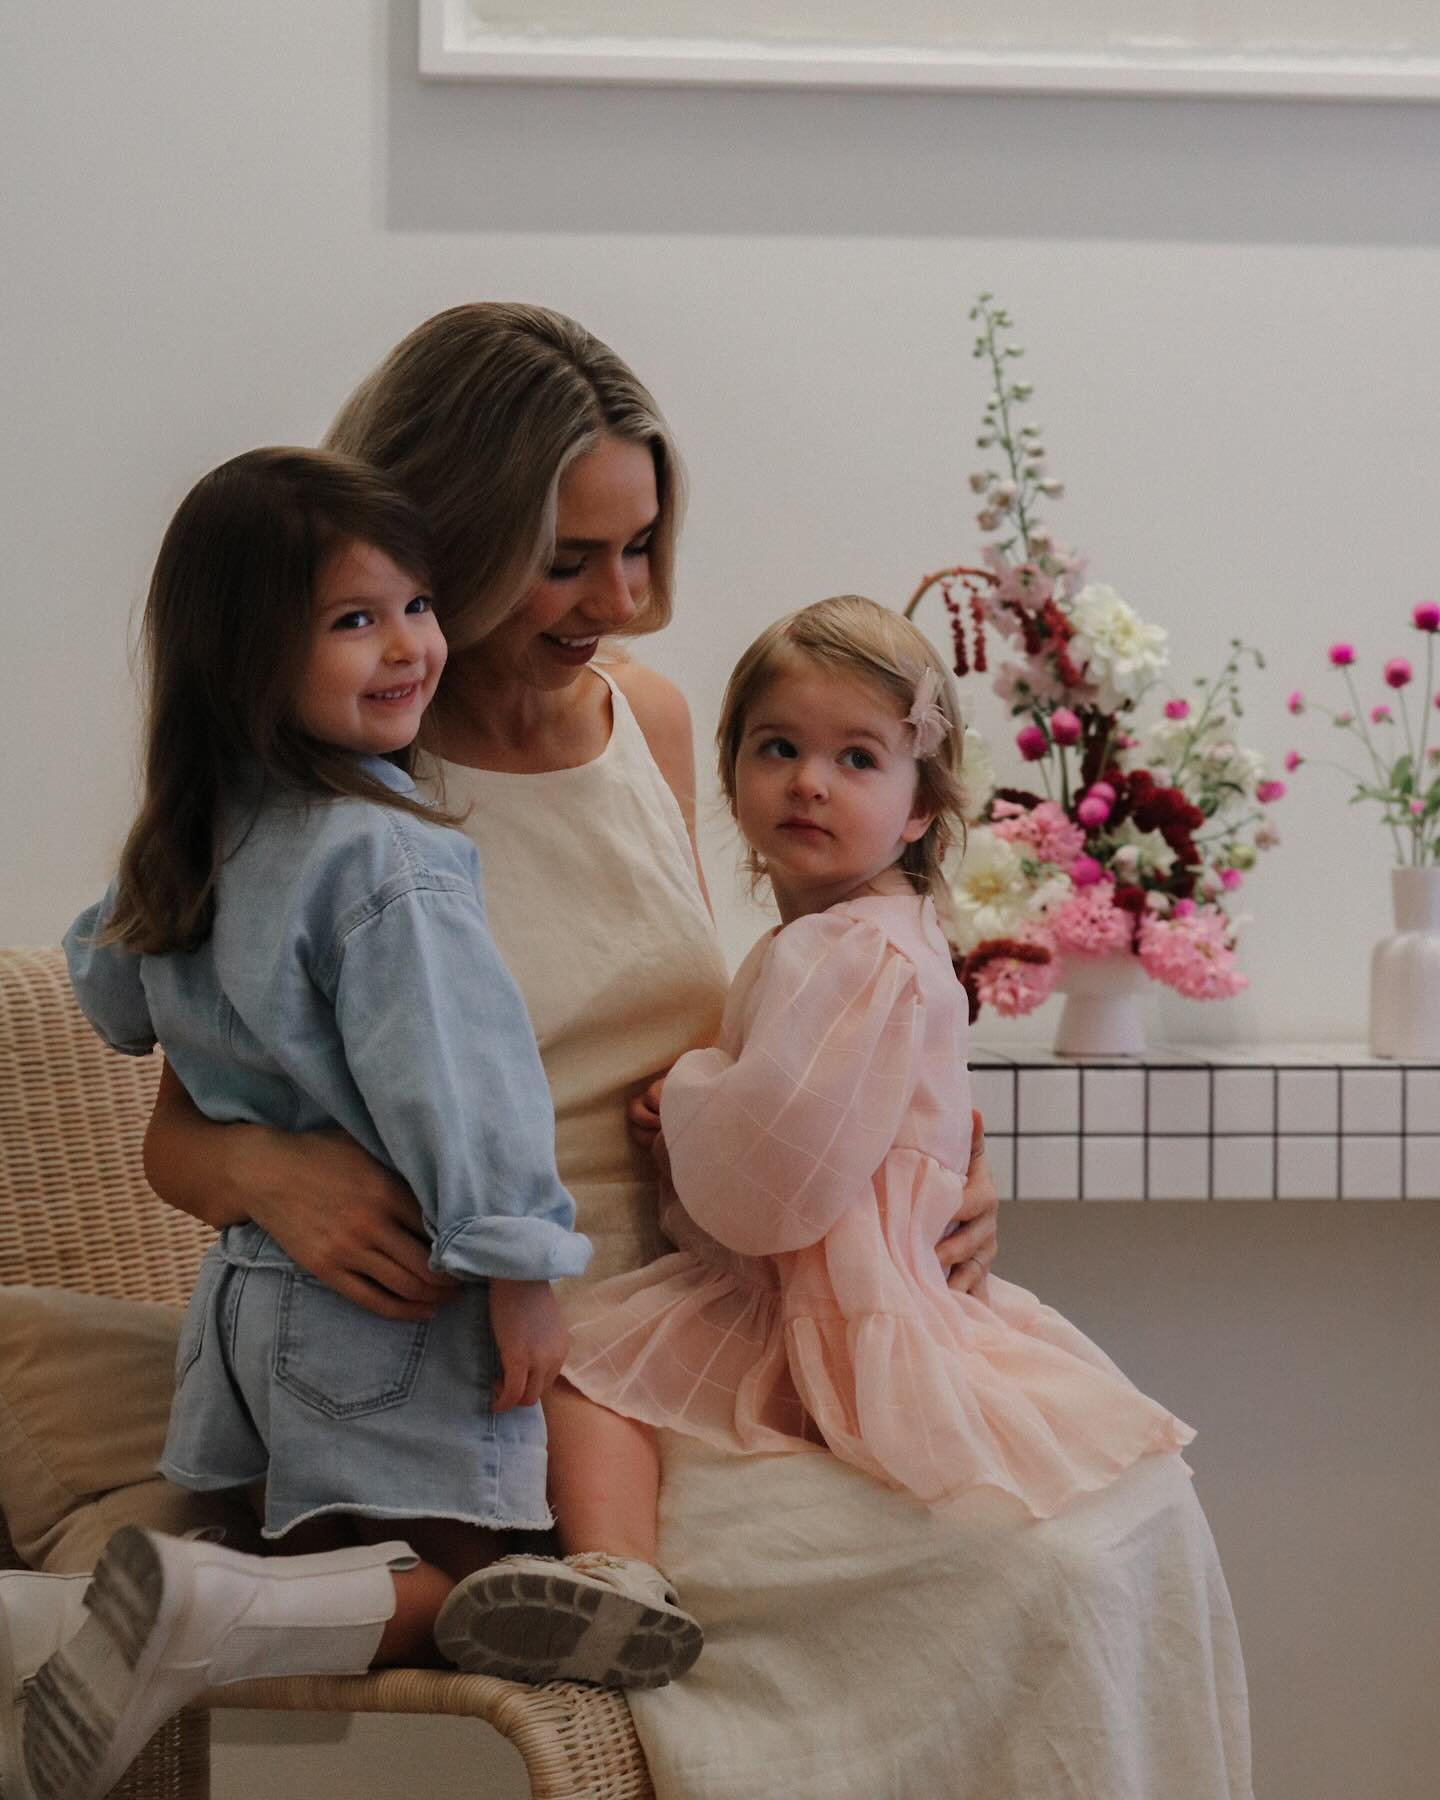 The Ultimate Mother&rsquo;s Day Gift - Mother&rsquo;s Day Mini&rsquo;s

This year at @modernminds.com.au we are opening our space for &lsquo;Mother&rsquo;s Day Mini&rsquo;s&rsquo; to capture treasured moments with your family in our beautiful space. 